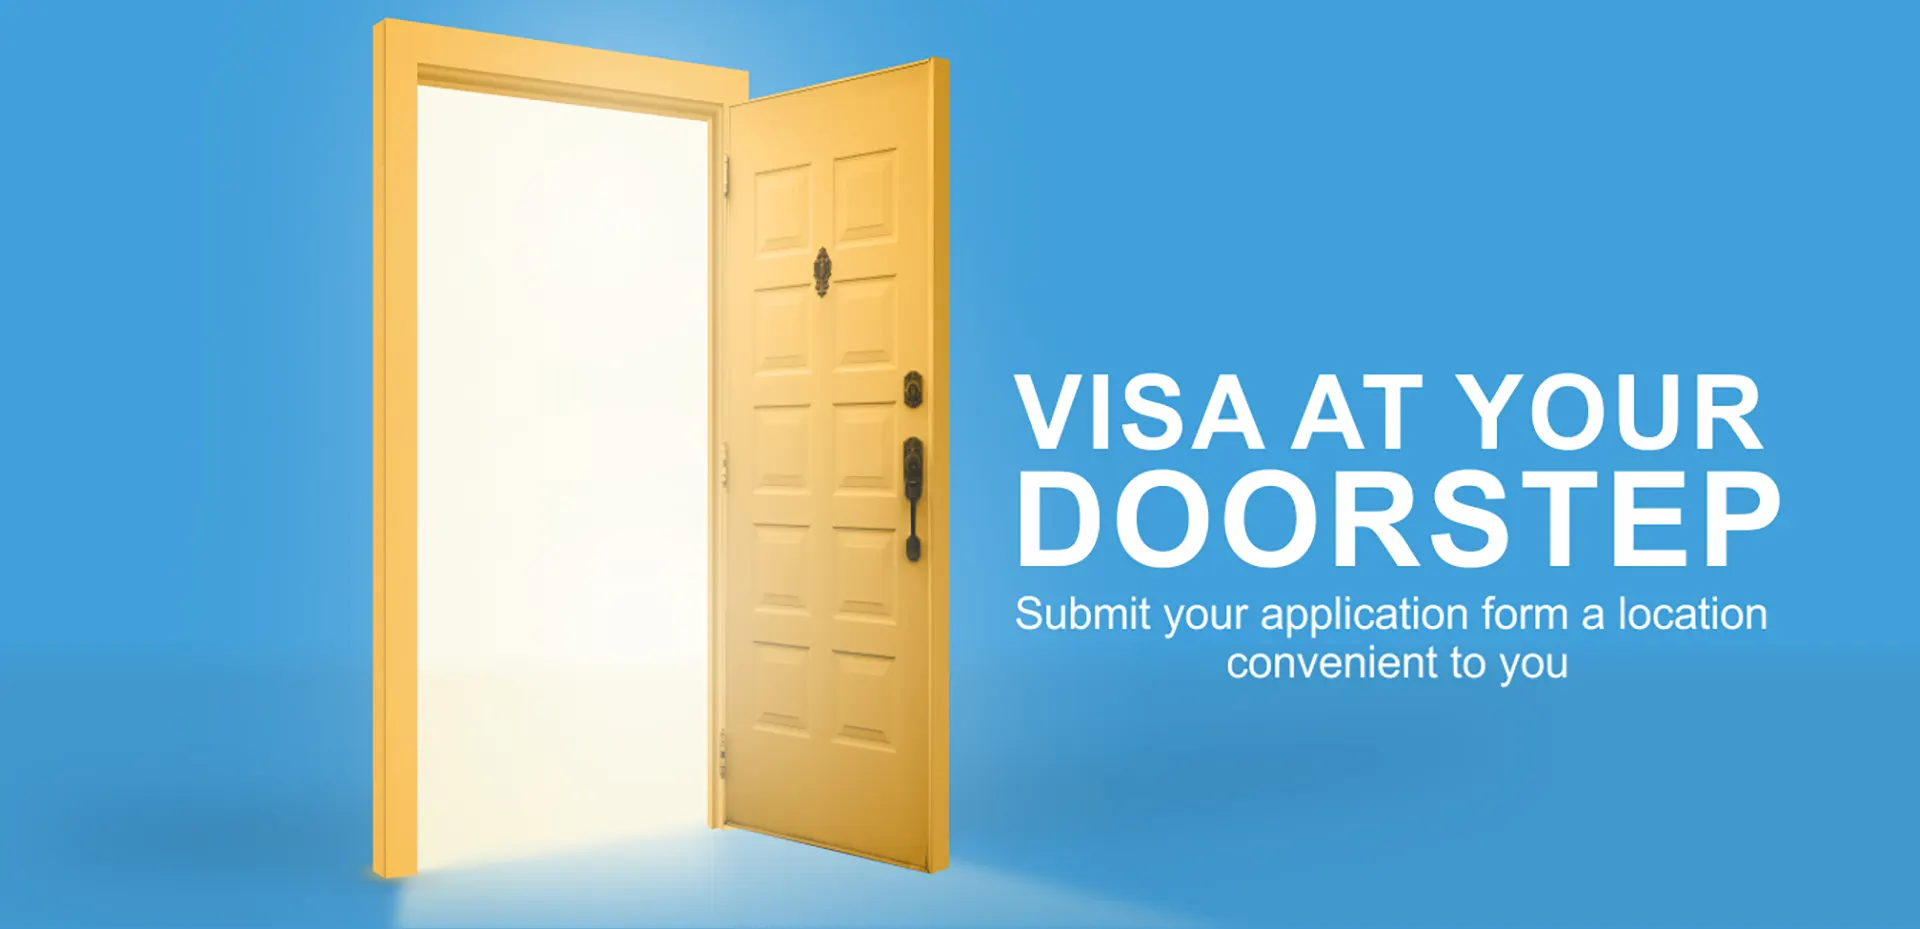 We received Thailand visa required document from your home